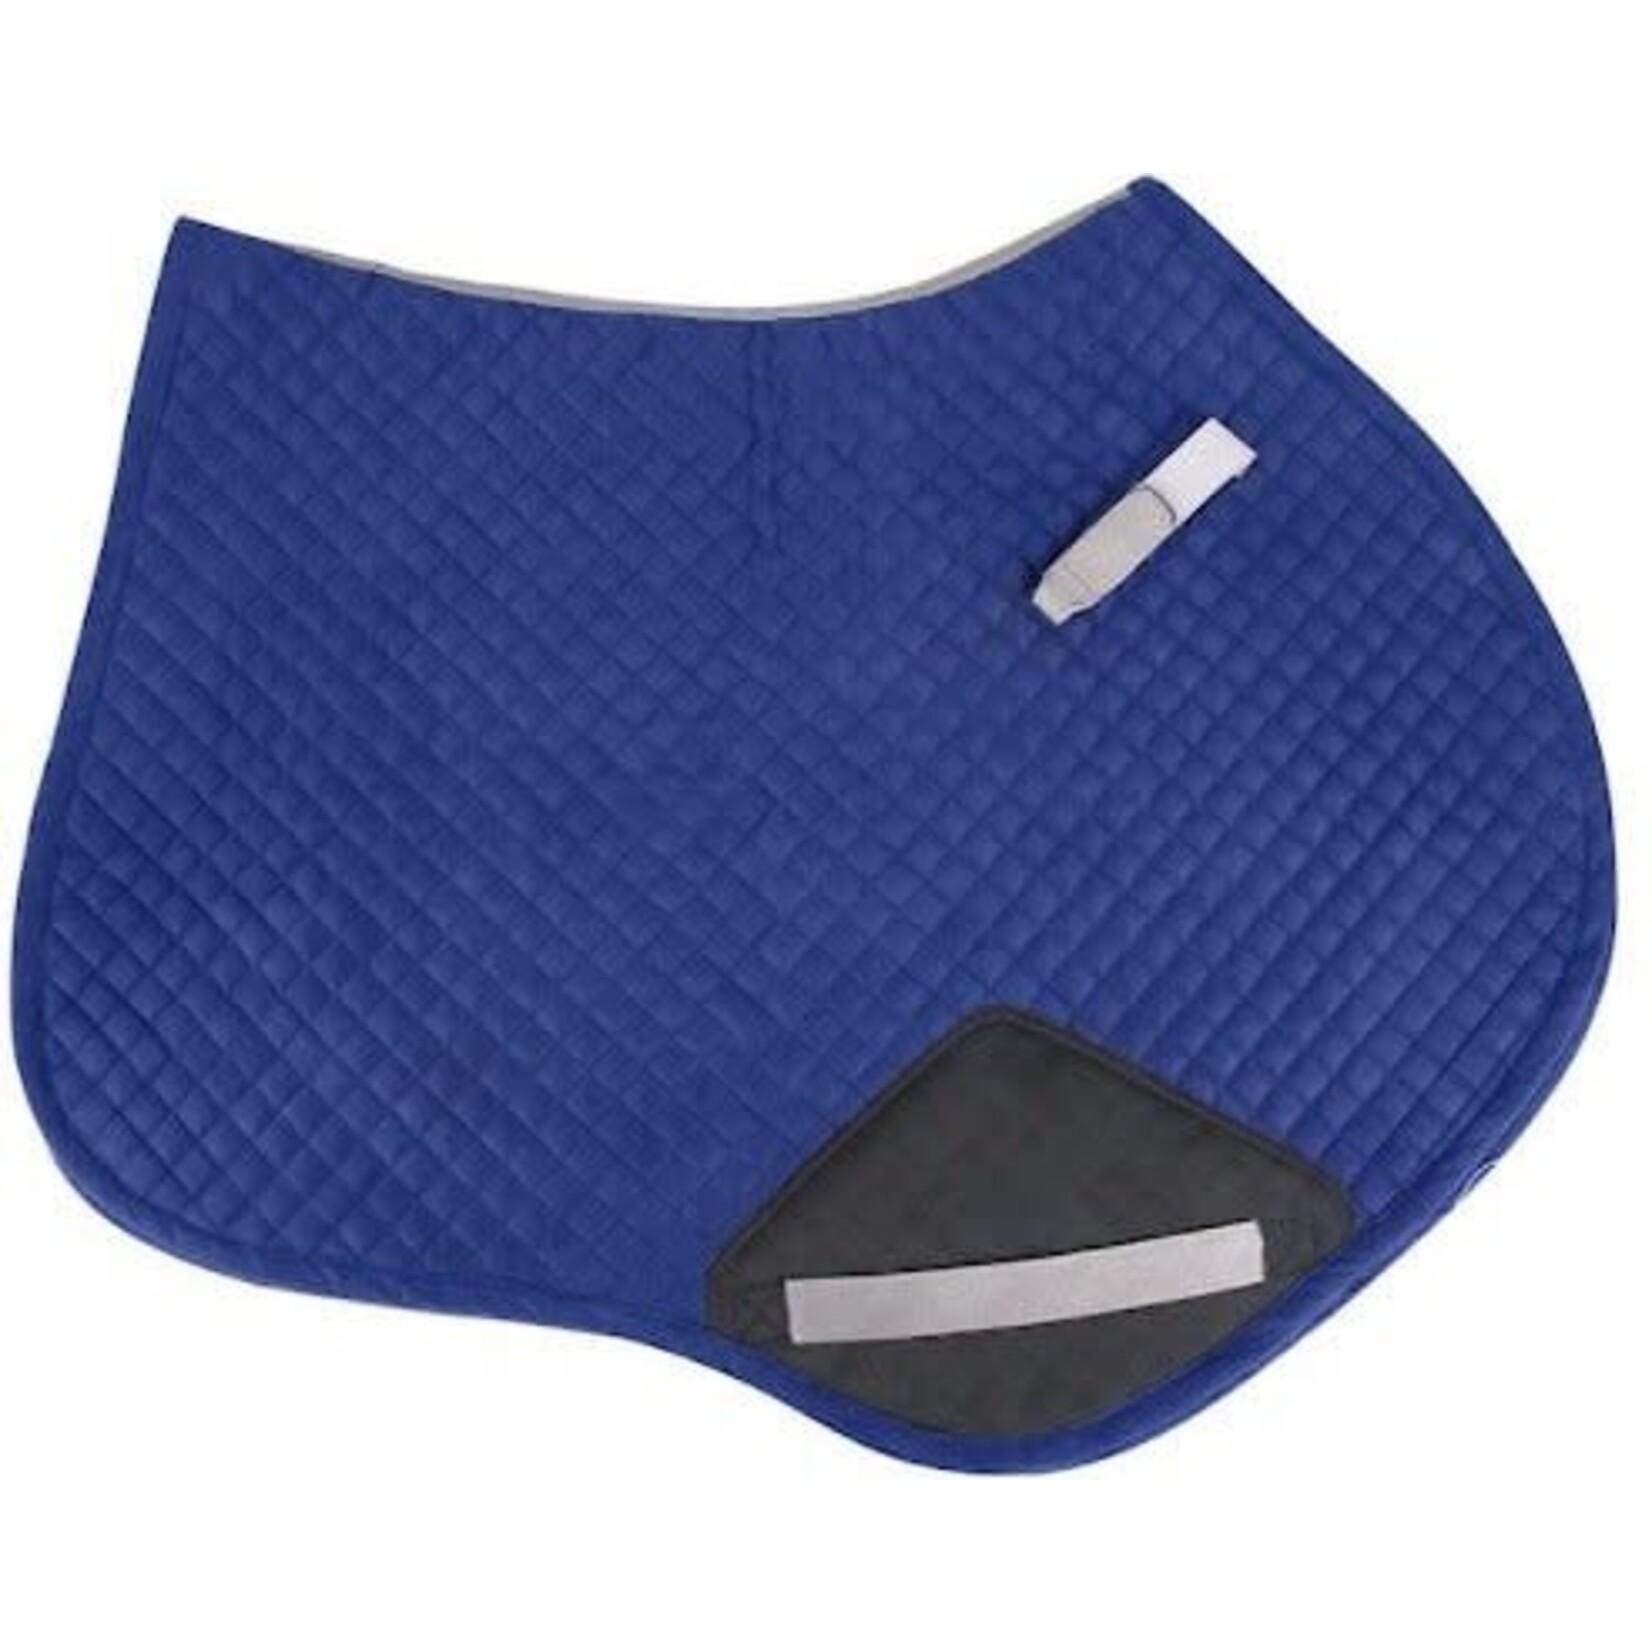 Equine Couture Equine Couture Performance Saddle Pad